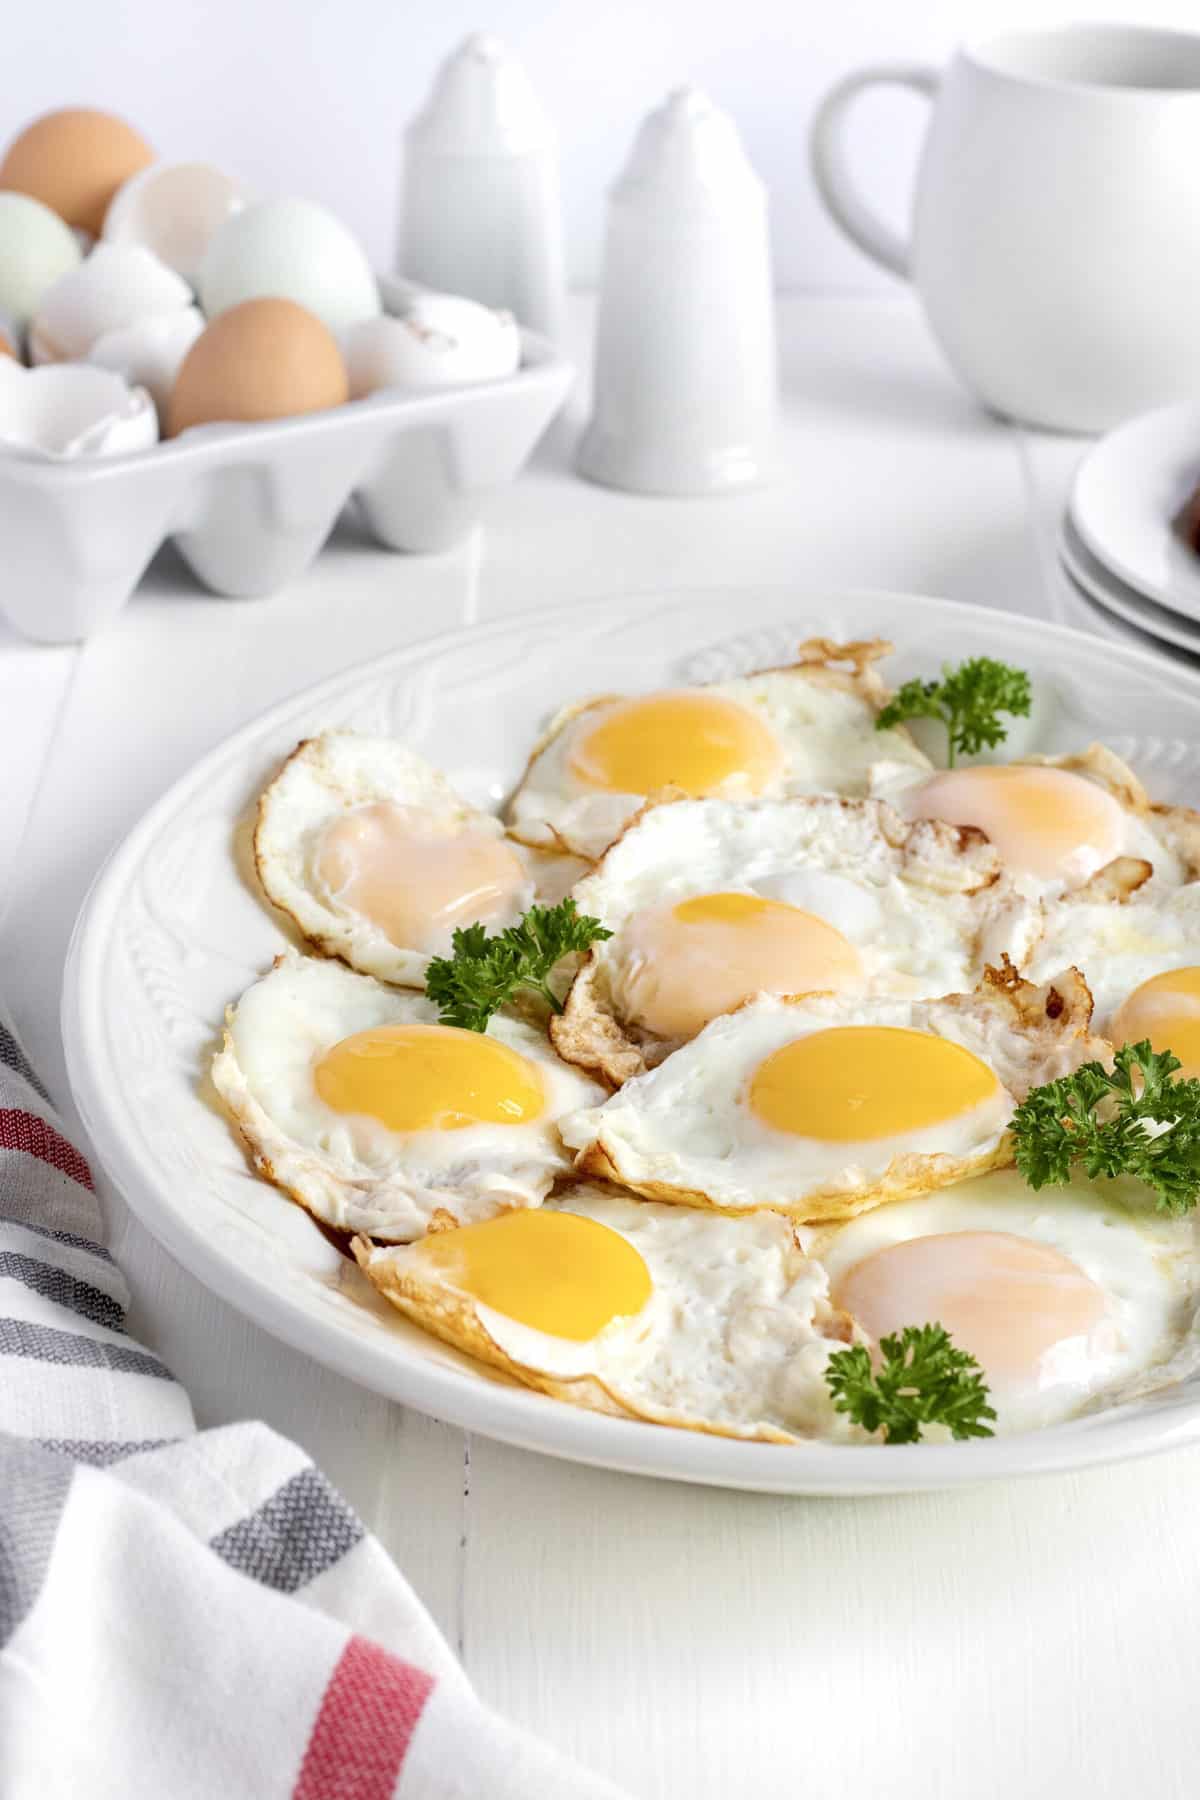 Sunny Side Up Eggs by The BakerMama